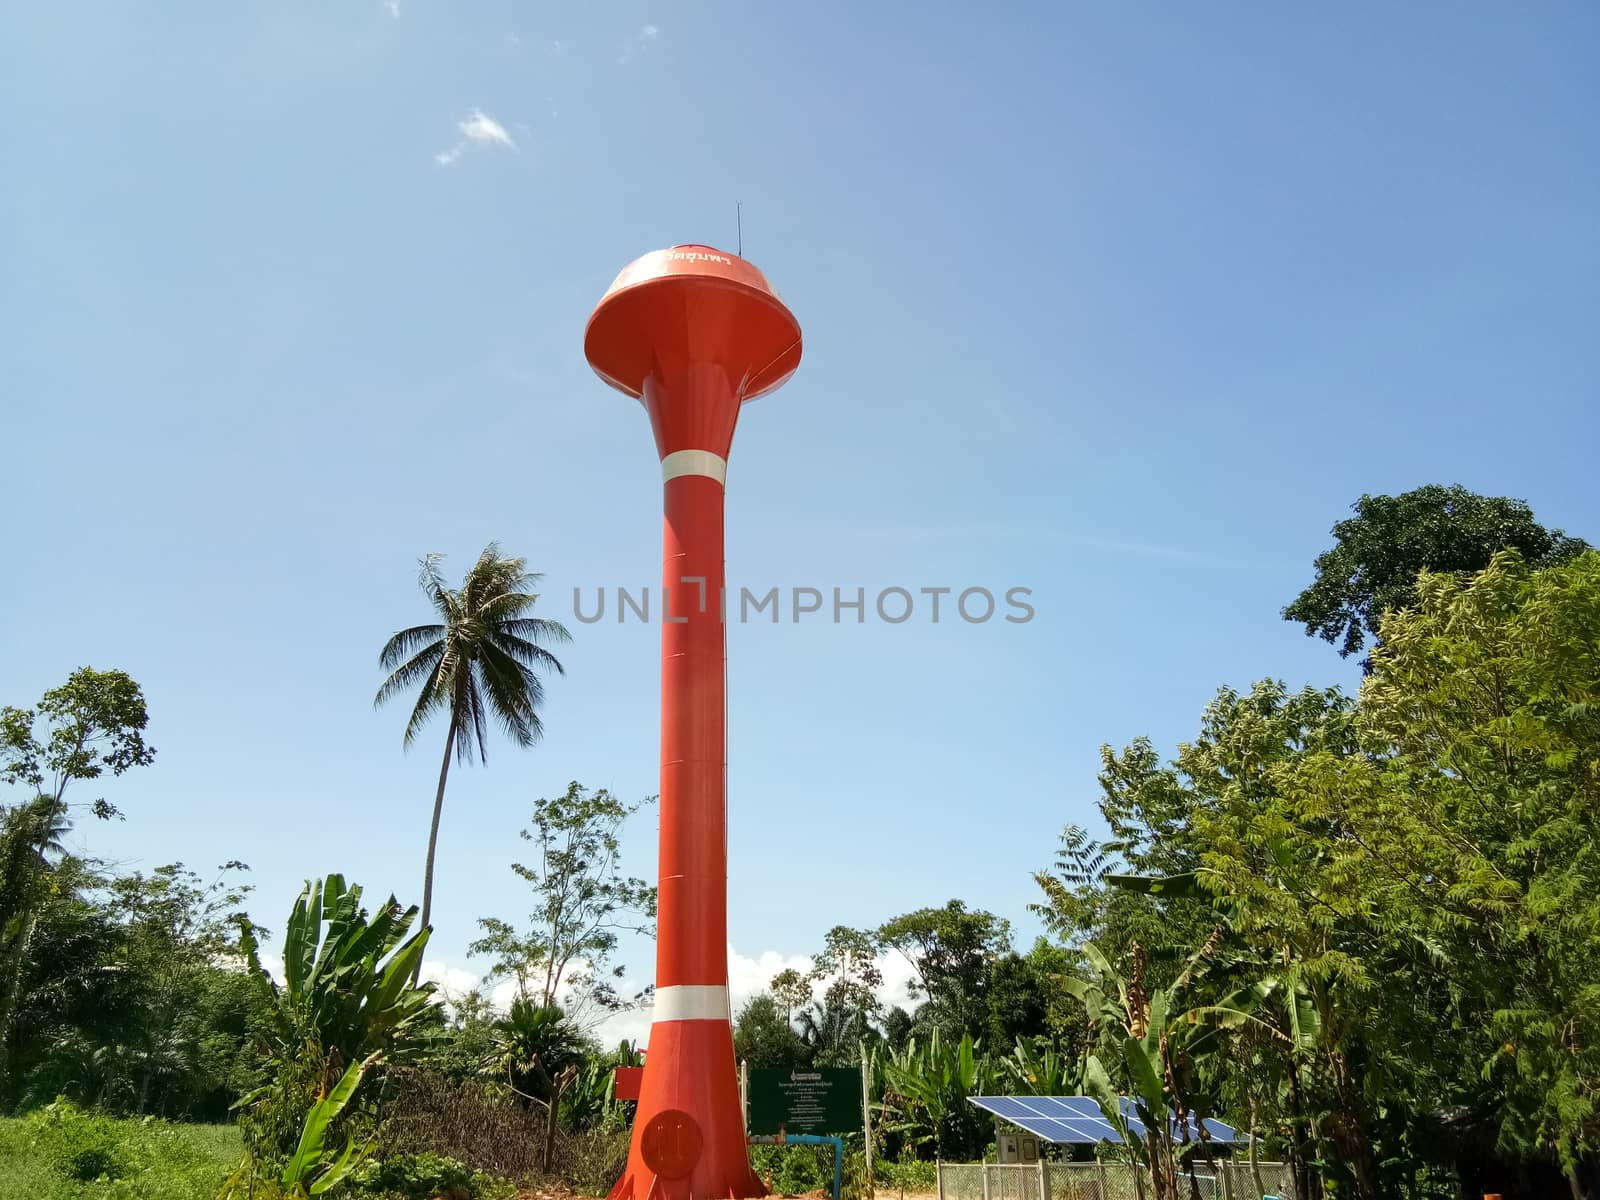 The solar pumping system, Red water tower with blue sky background.